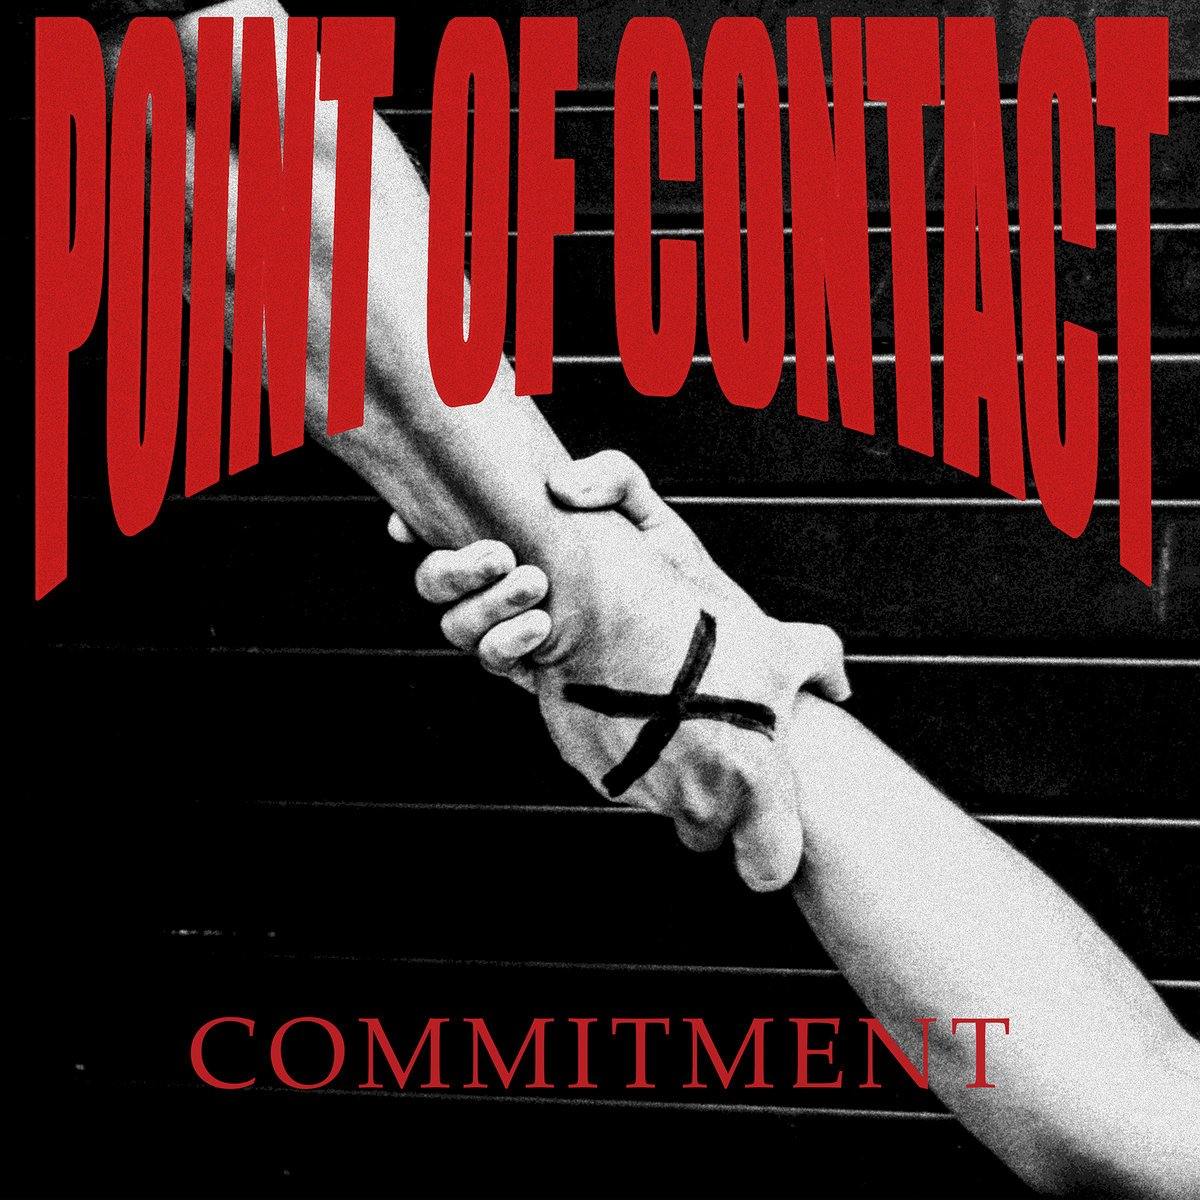 Buy – Point of Contact "Commitment" 12" – Band & Music Merch – Cold Cuts Merch